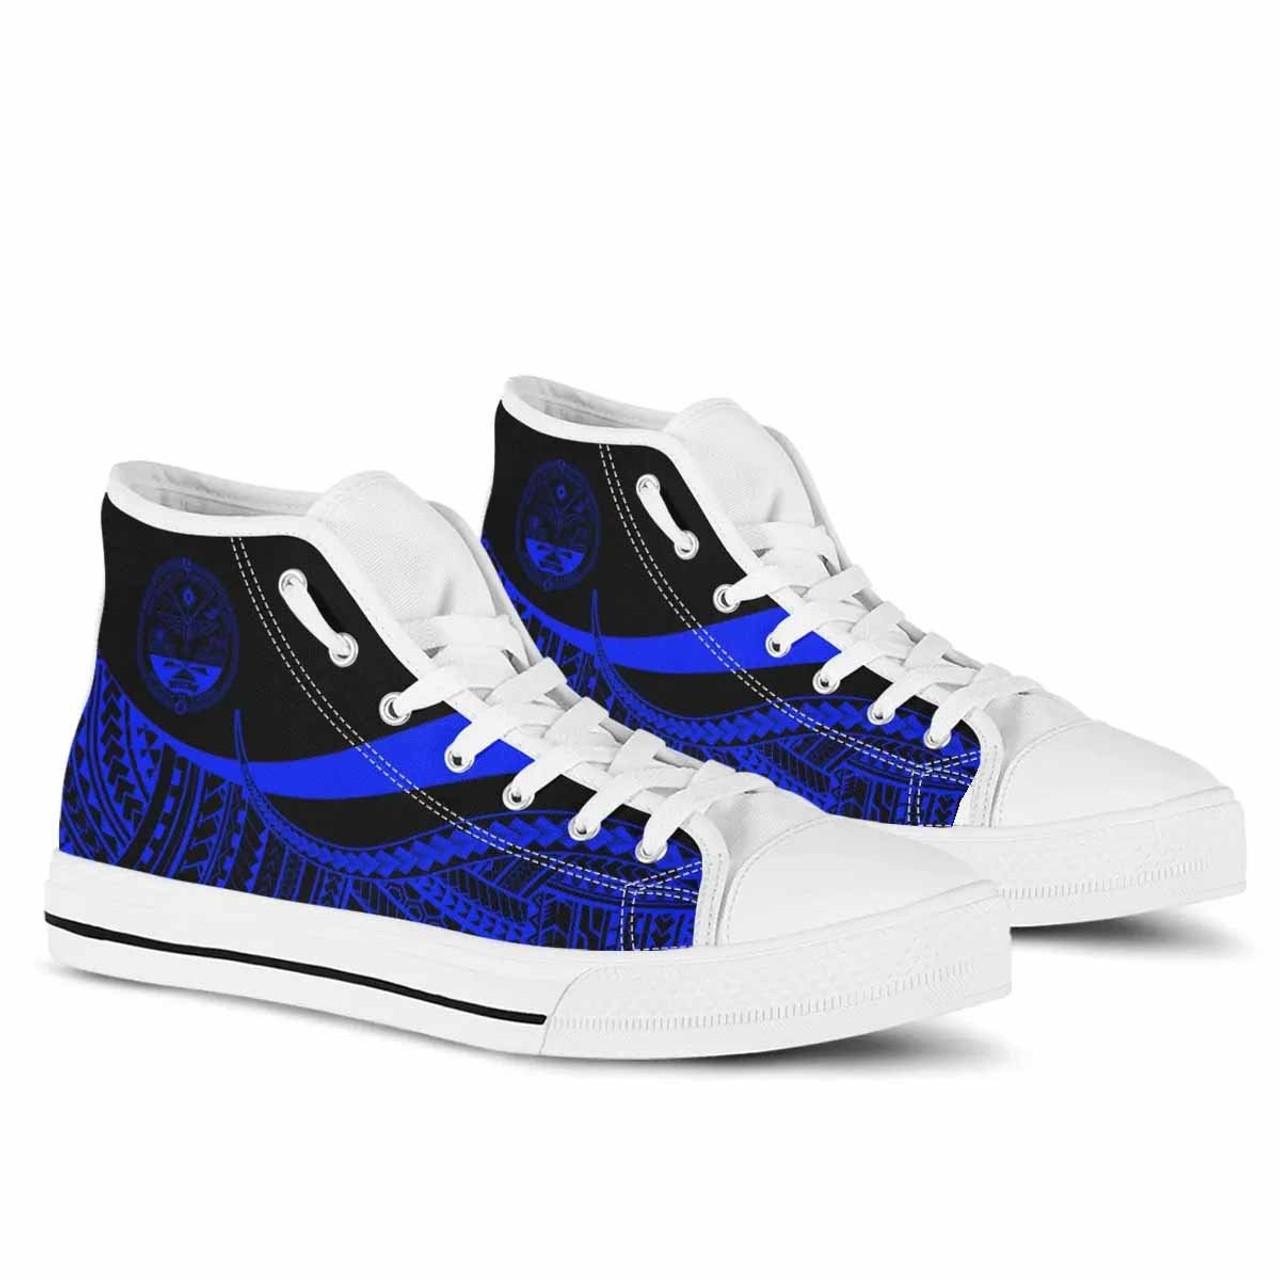 Marshall Islands High Top Shoes Blue - Polynesian Tentacle Tribal Pattern Crest 6